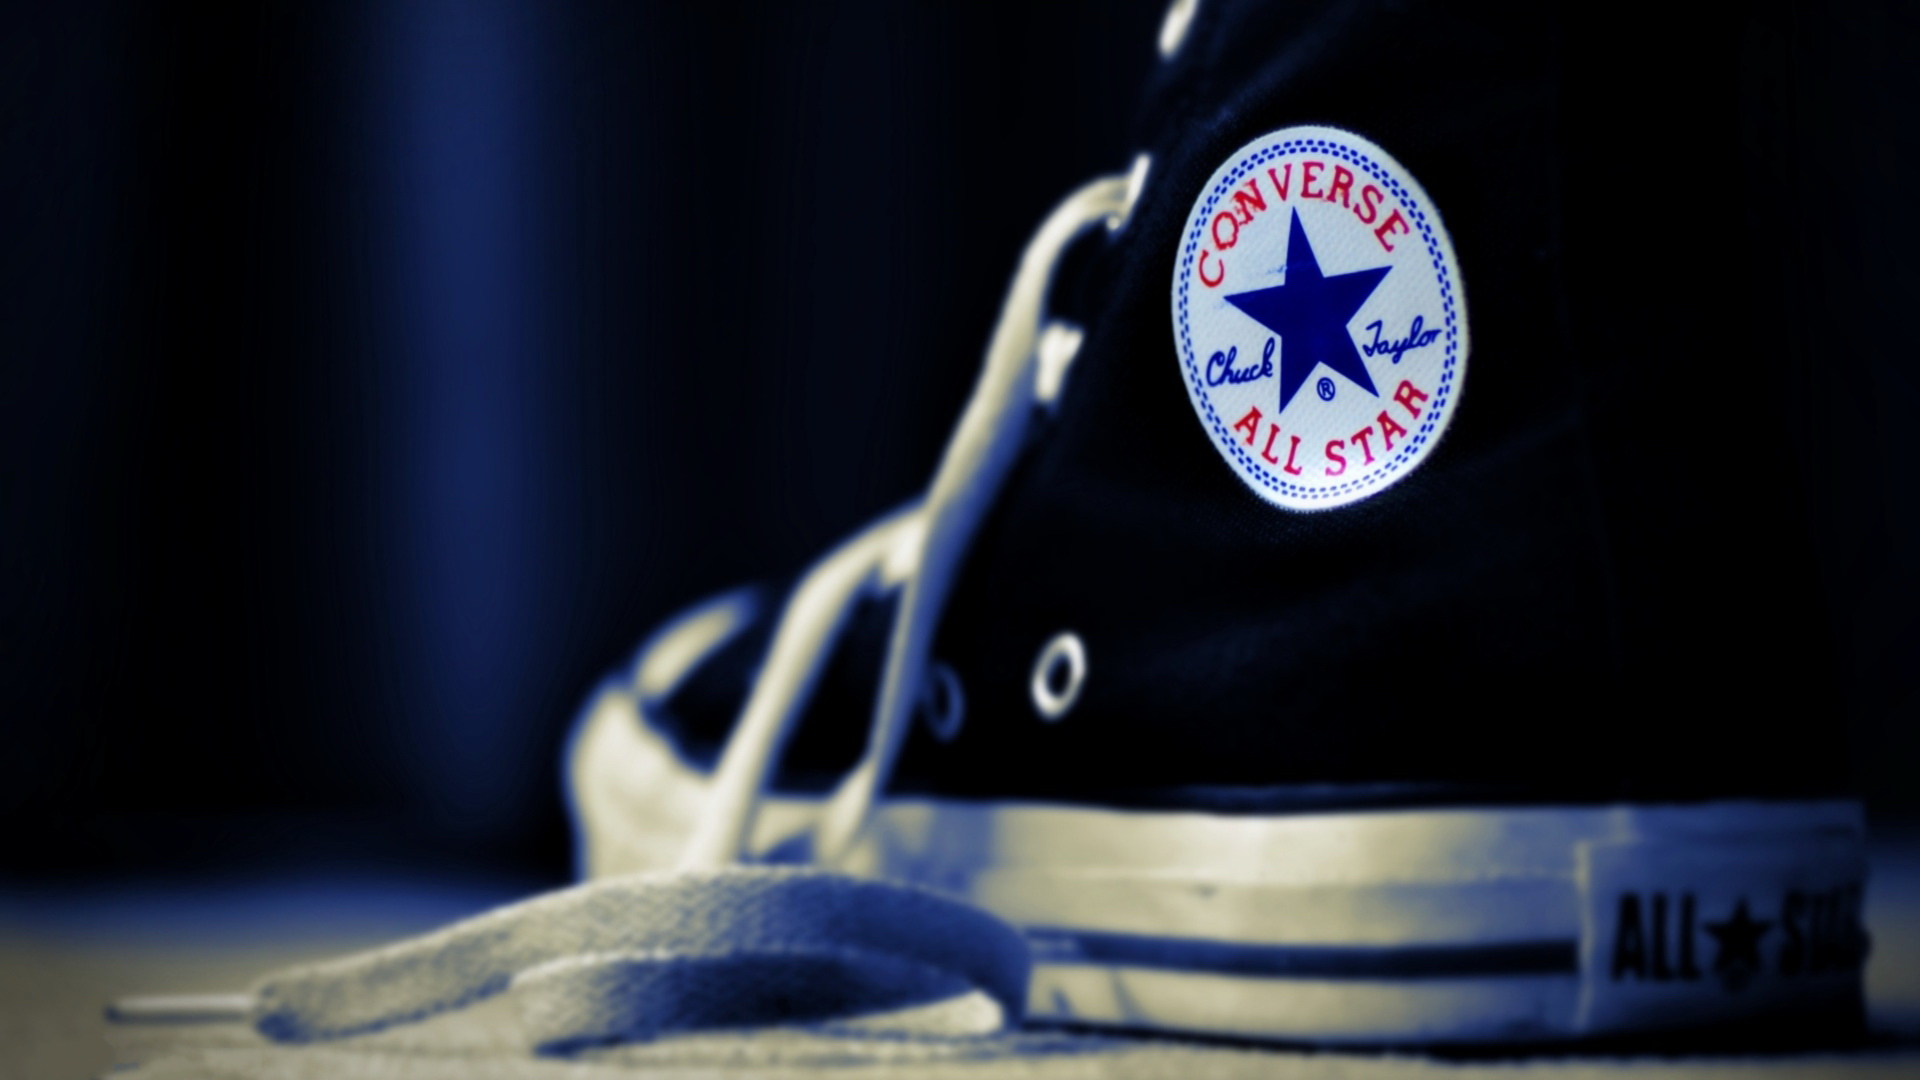 products, converse